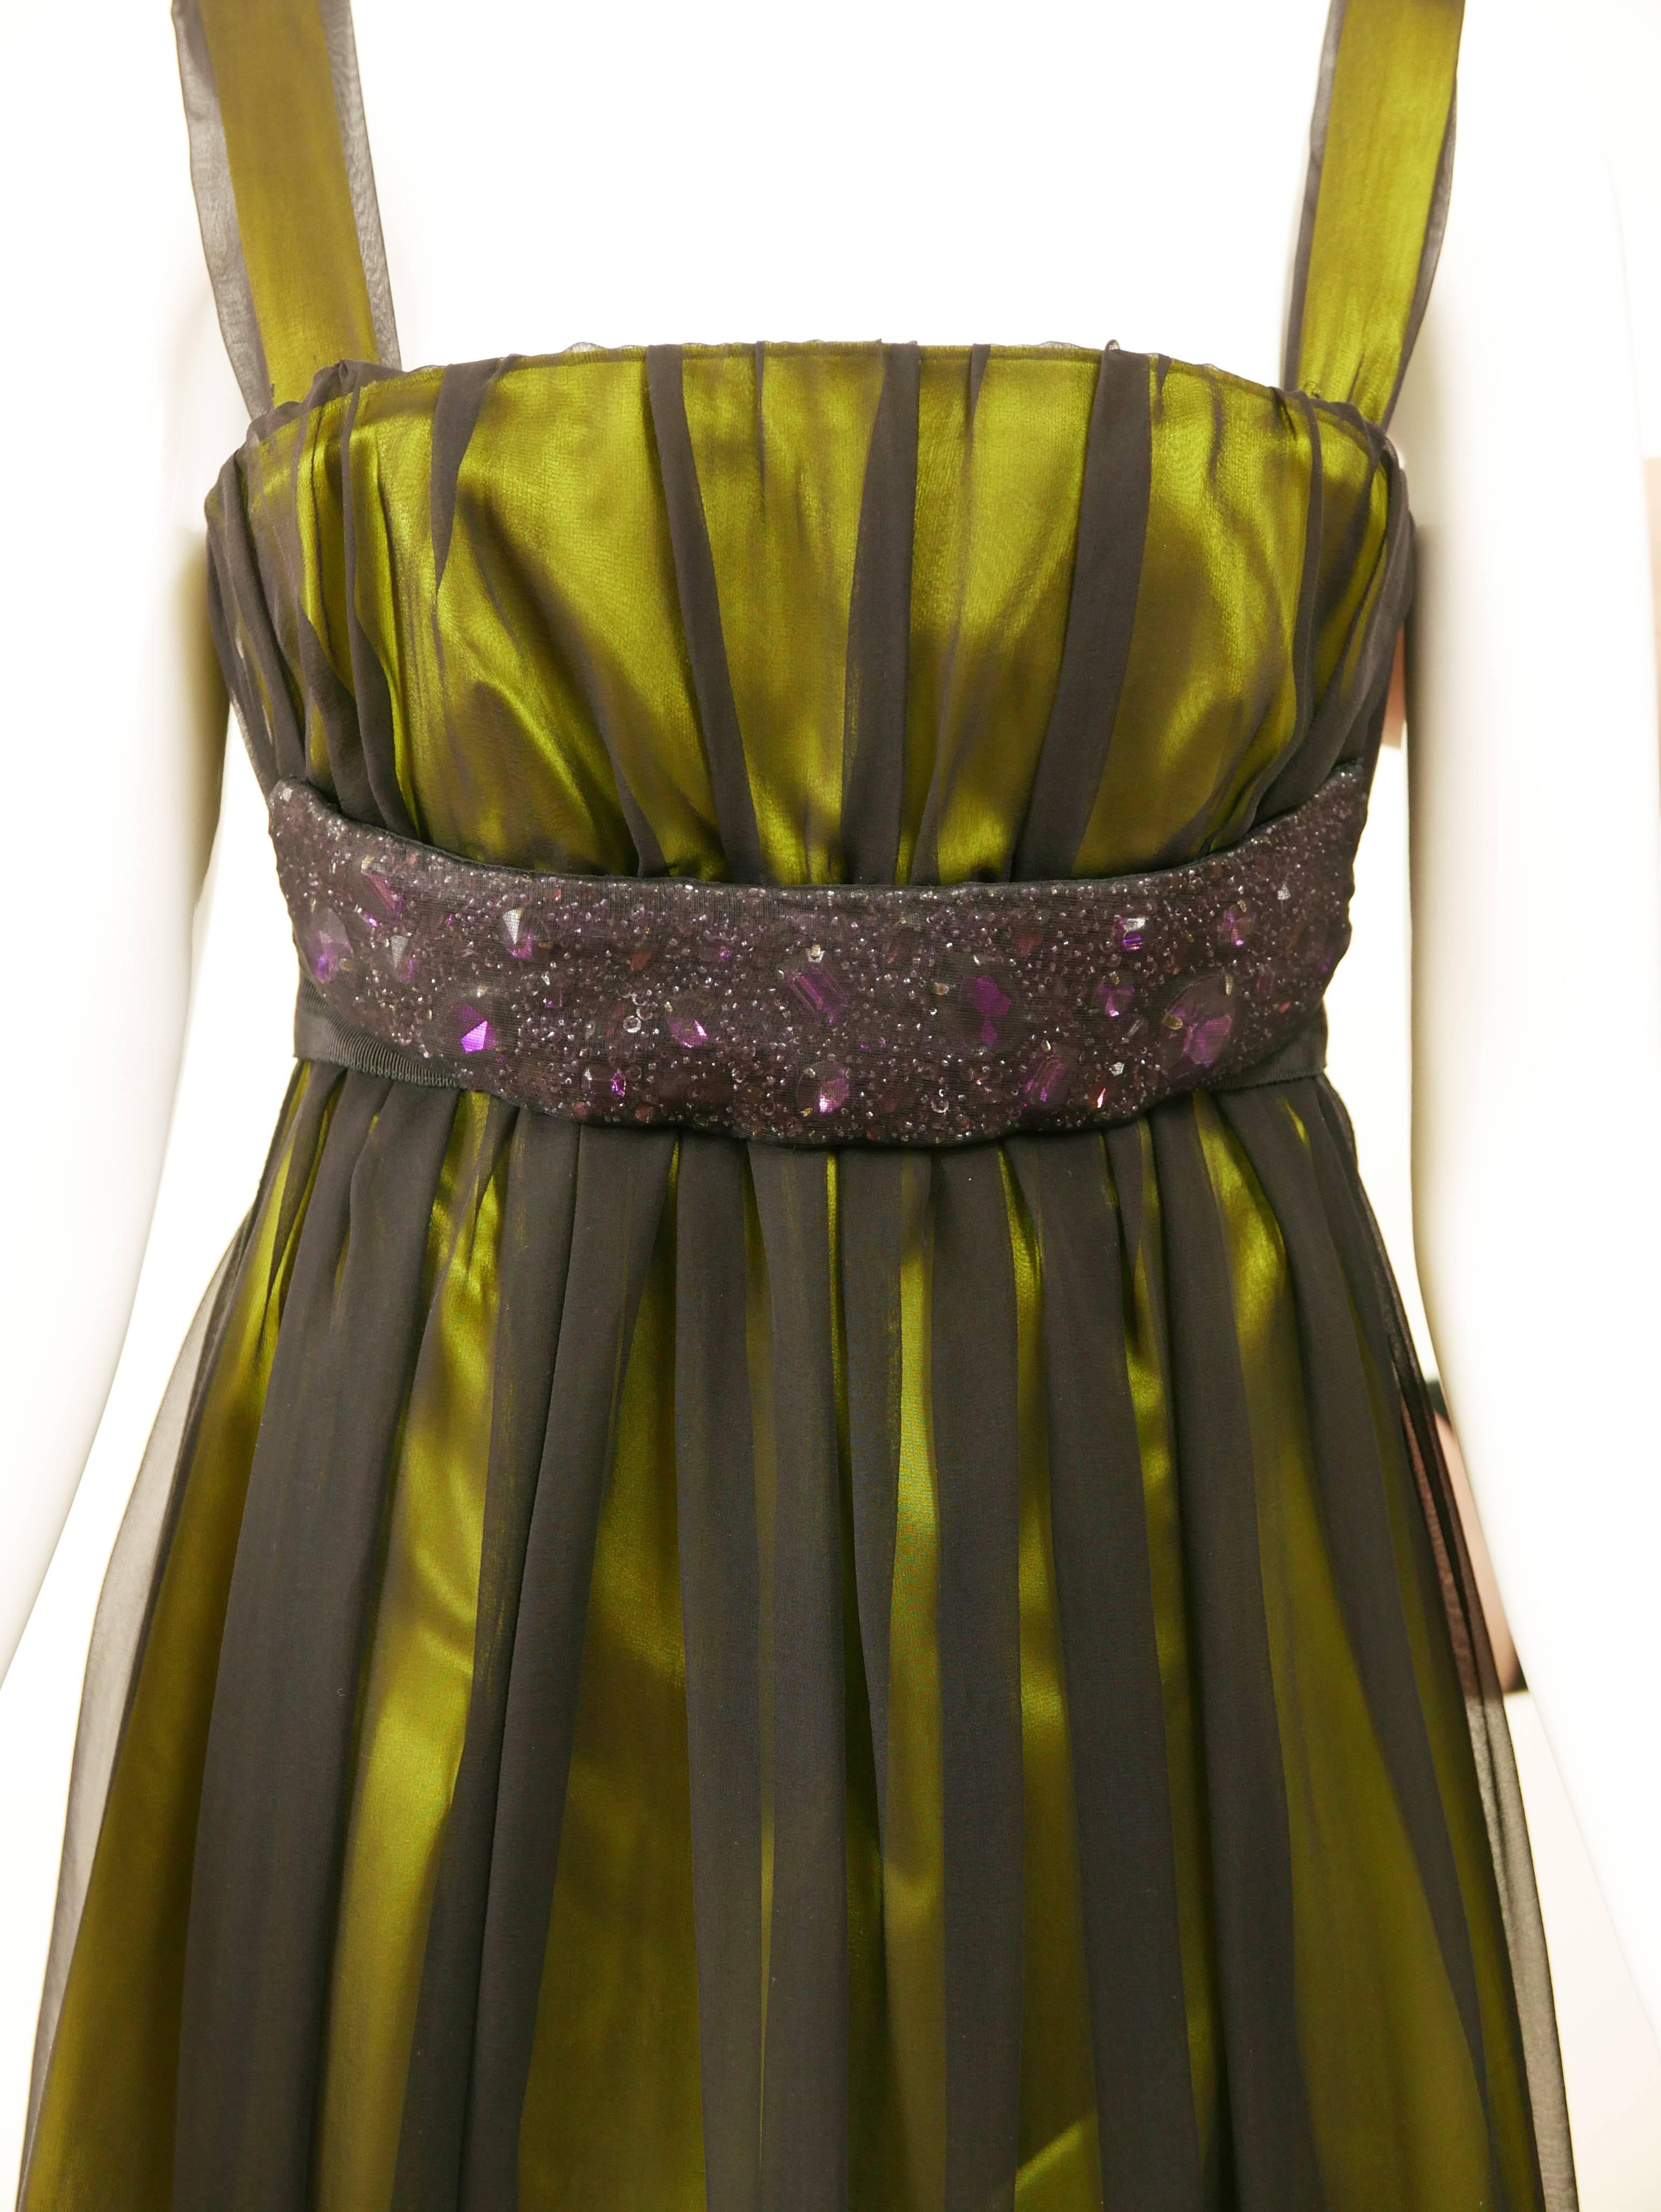 DOLCE & GABBANA Black Sheer and Green Satin Embroidered Cocktail Dress 1